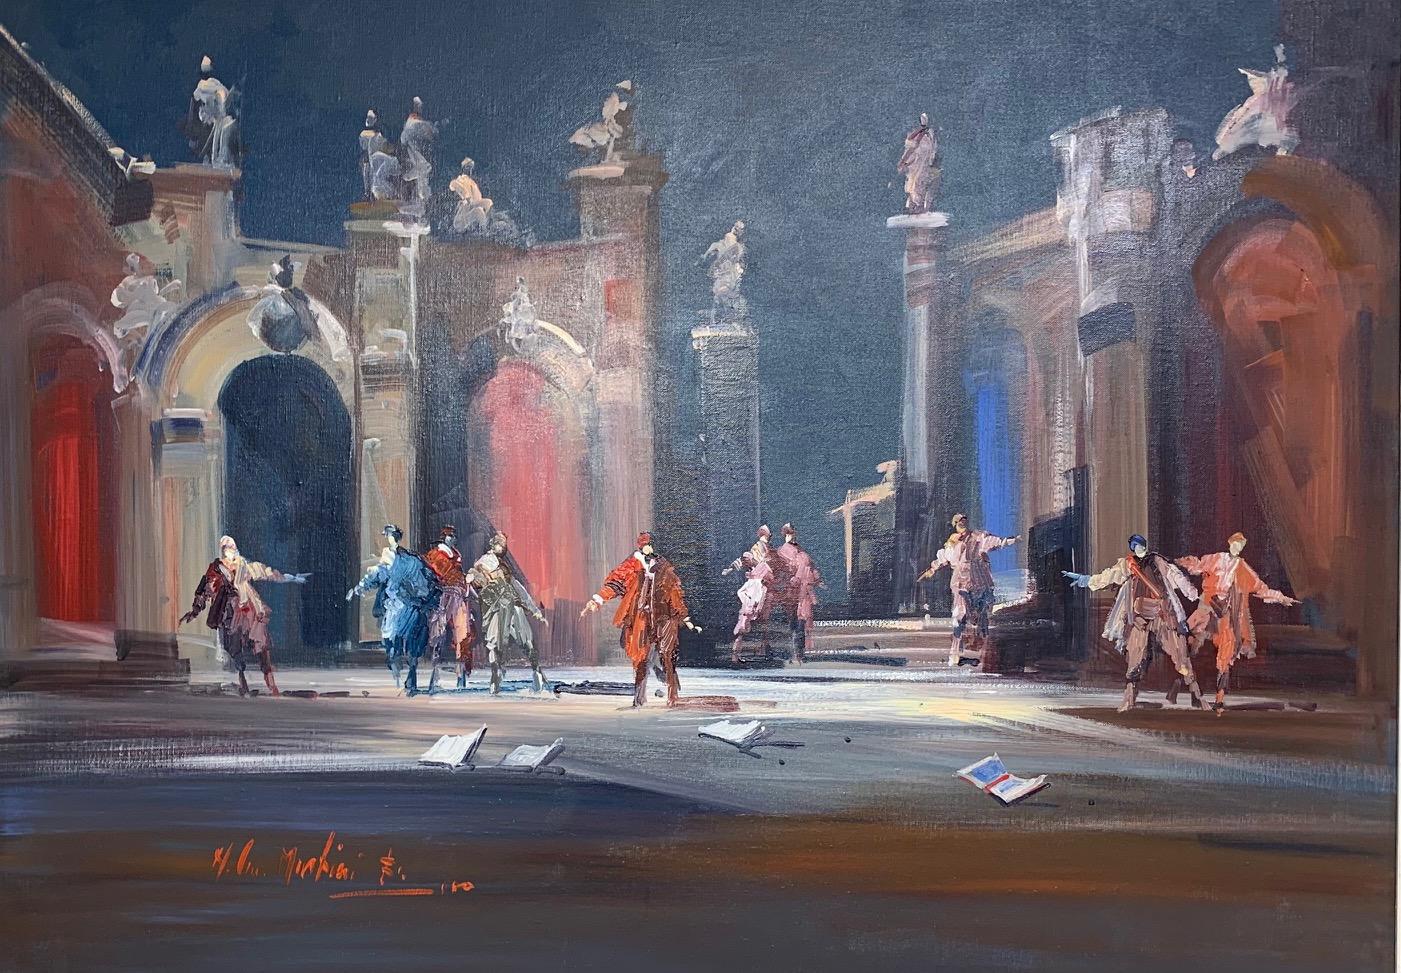 Norberto Martini (1940-2007)
From his studio on the Arno, dressed in a three-piece suit, Martini brought his experiences of his time singing opera coupled with being a devout Catholic to his colorful canvases.
Alter boys dance, play, and get into